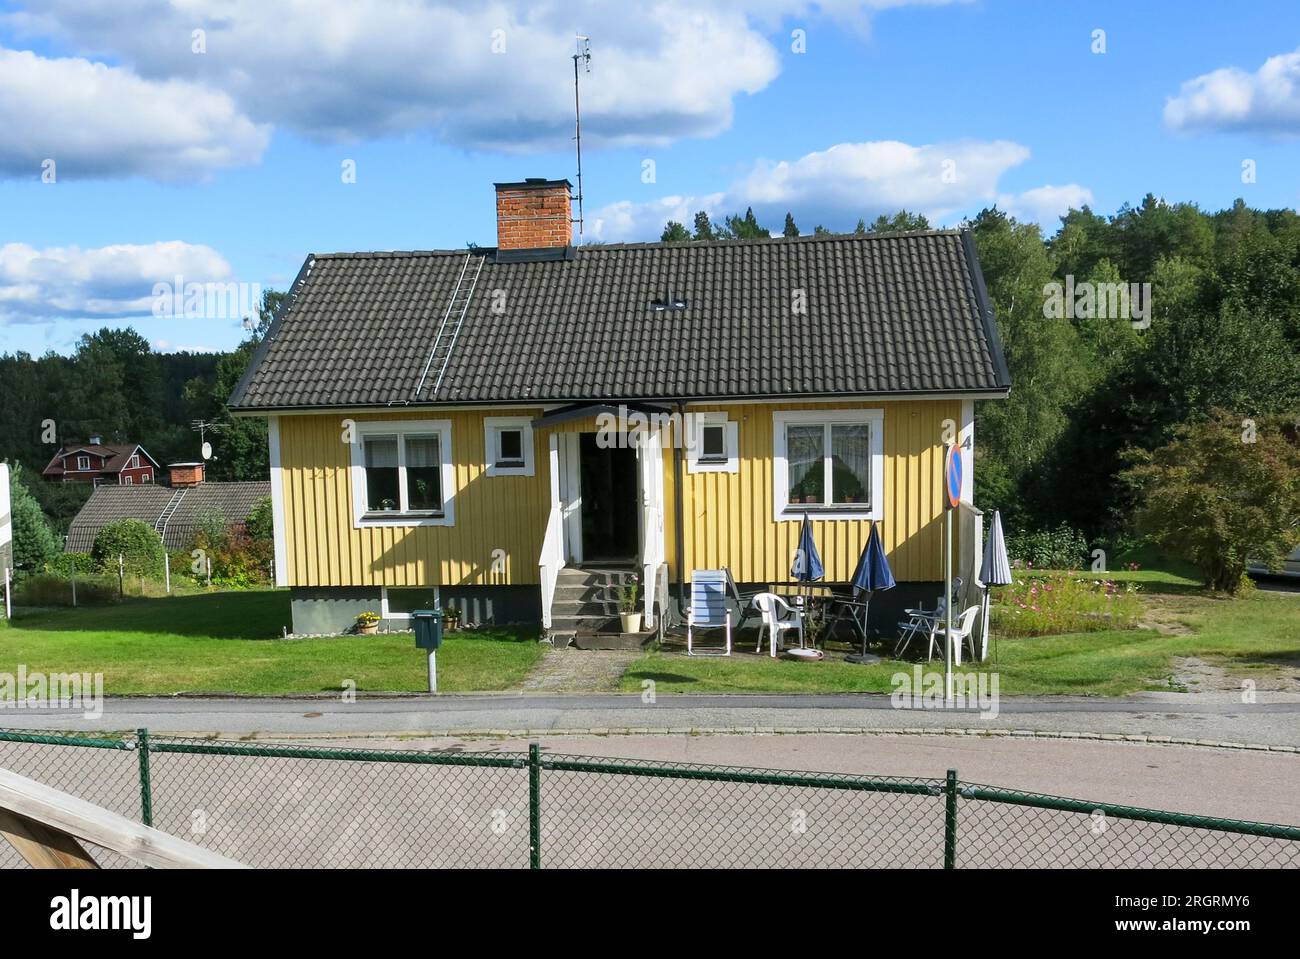 OWN HOME BUILDING  in Swedish style in wood Stock Photo